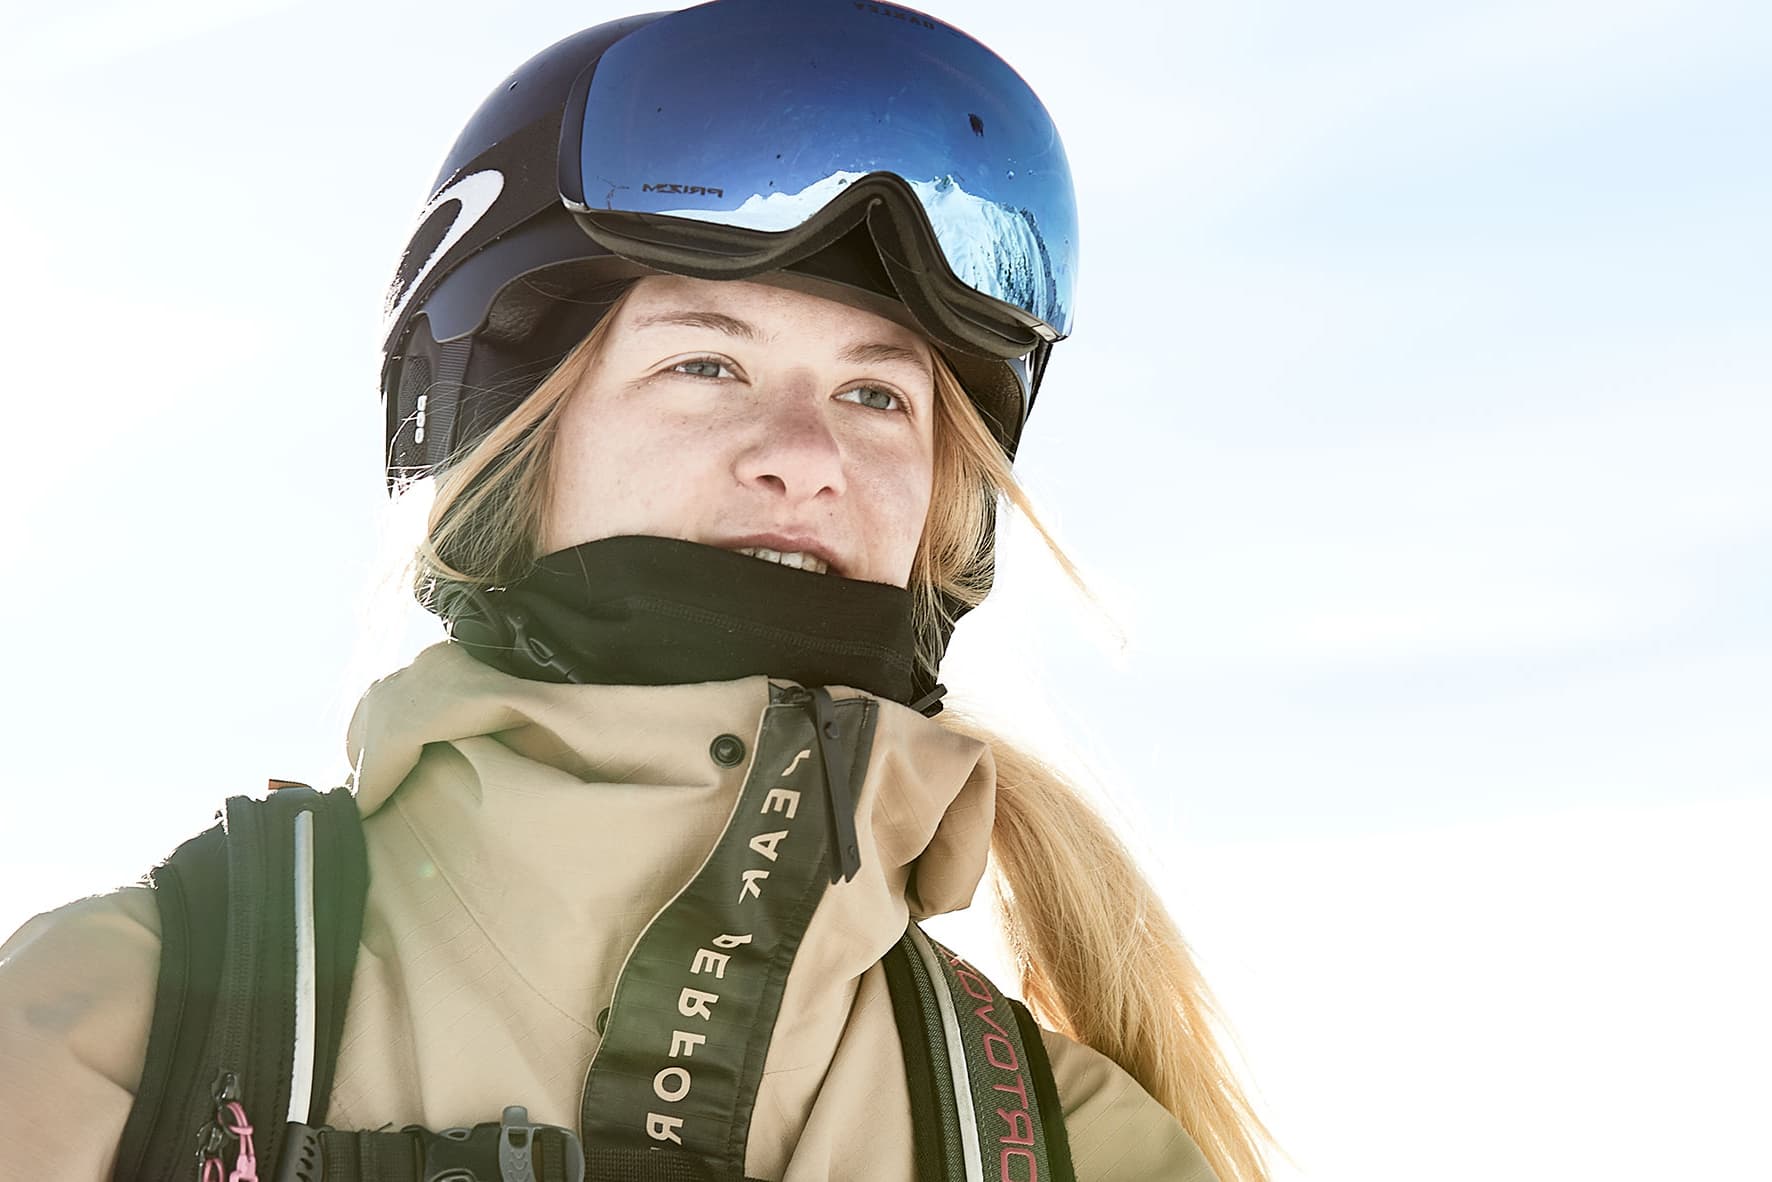 Portrait shot of a ski girl wearing a helmet and goggles while climbing the slopes on a ski tour.